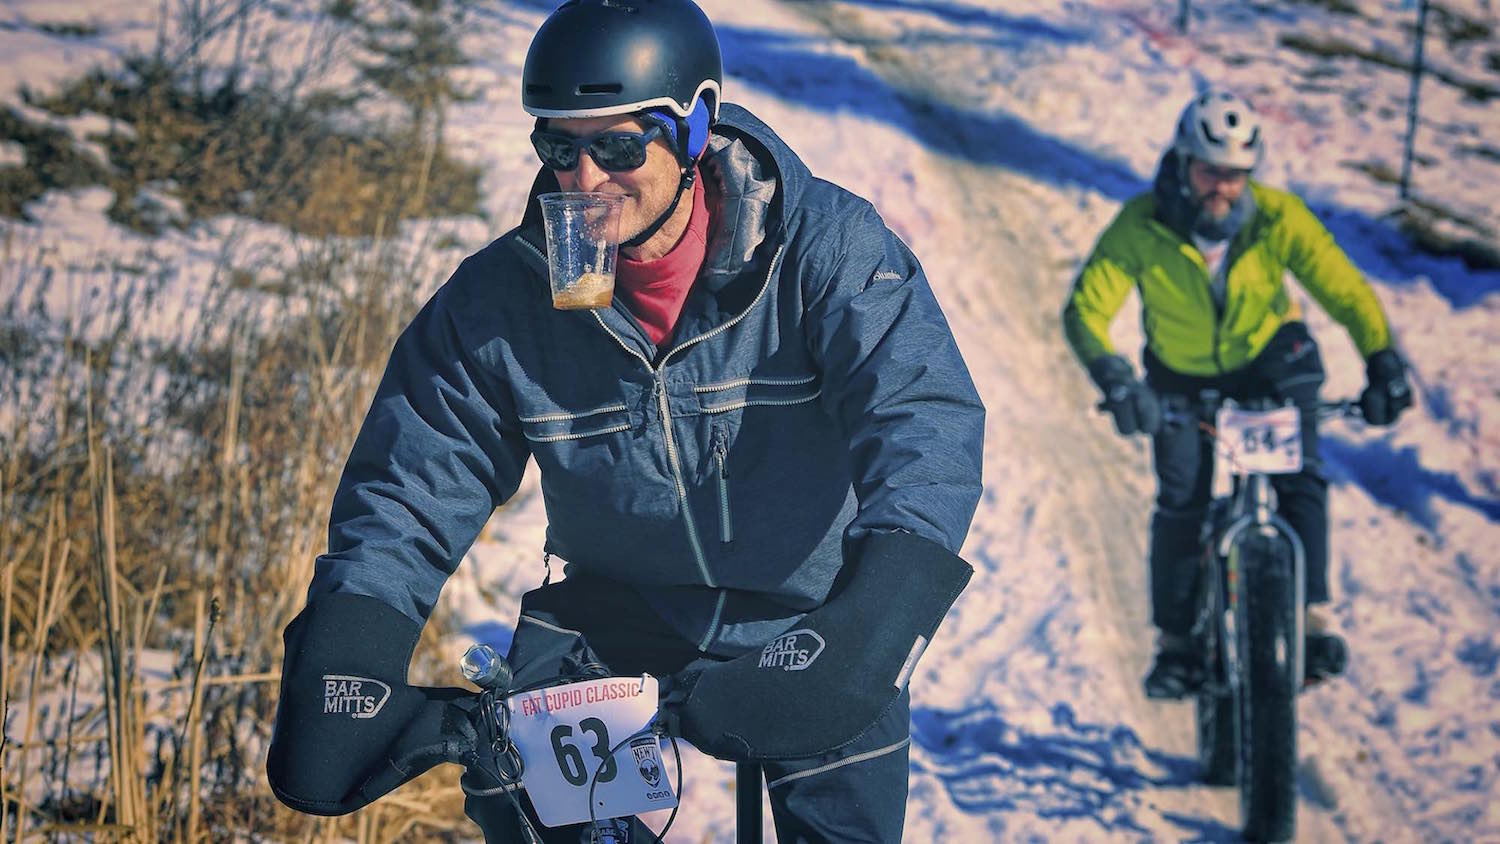 A fat bike rider holds his beer in his teeth after a fast descent during the Fat Cupid Classic.